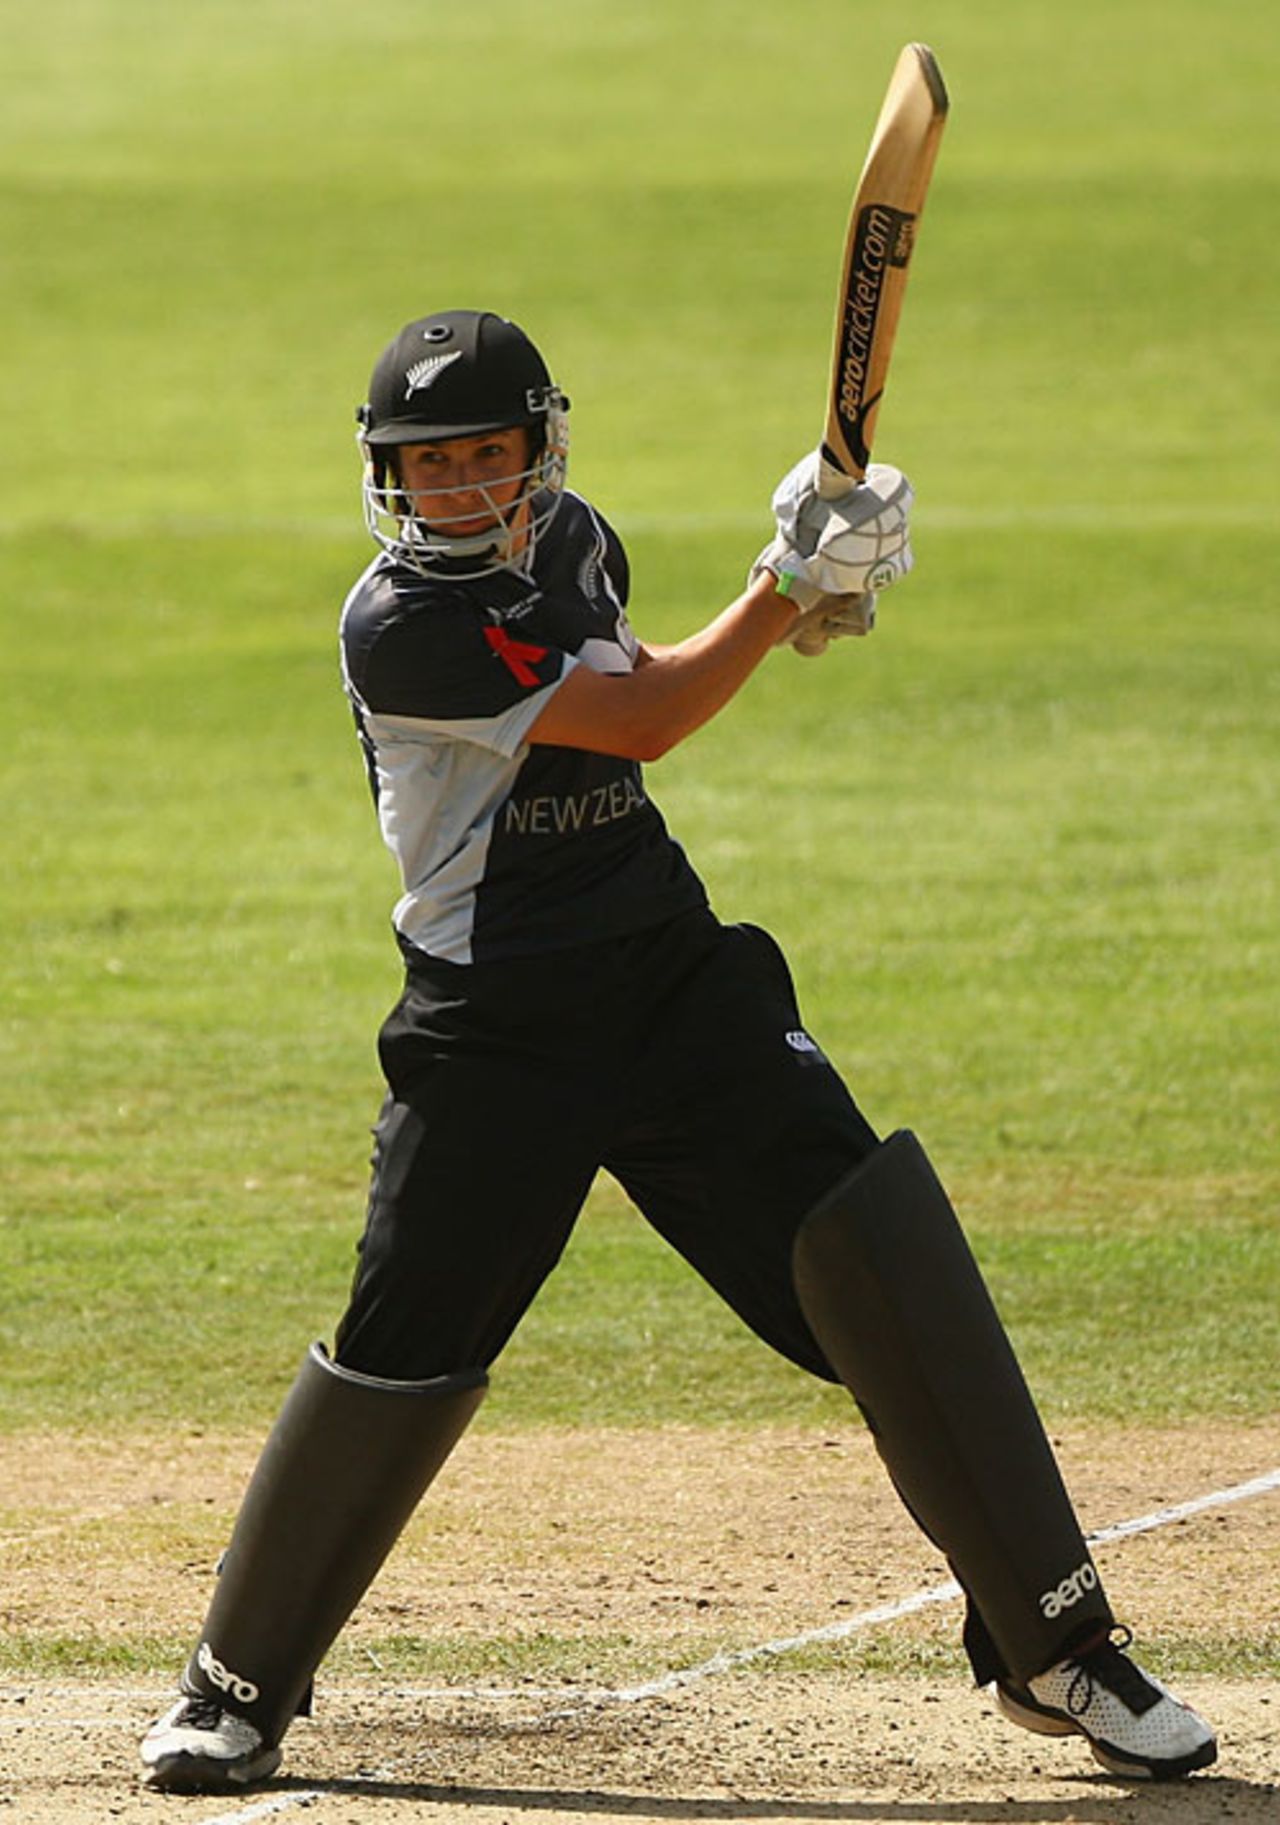 Sara McGlashan cuts on her way to 21, England v New Zealand, women's World Cup final, Sydney, March 22, 2009